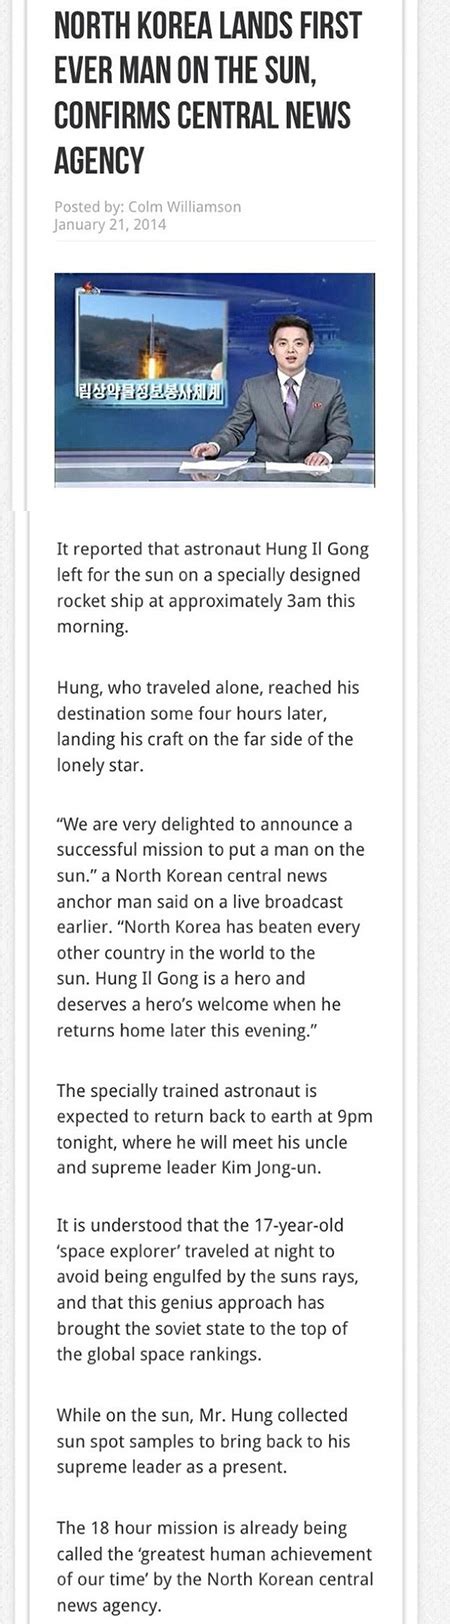 So This Happened North Korea Claims To Have Landed Man On The Sun